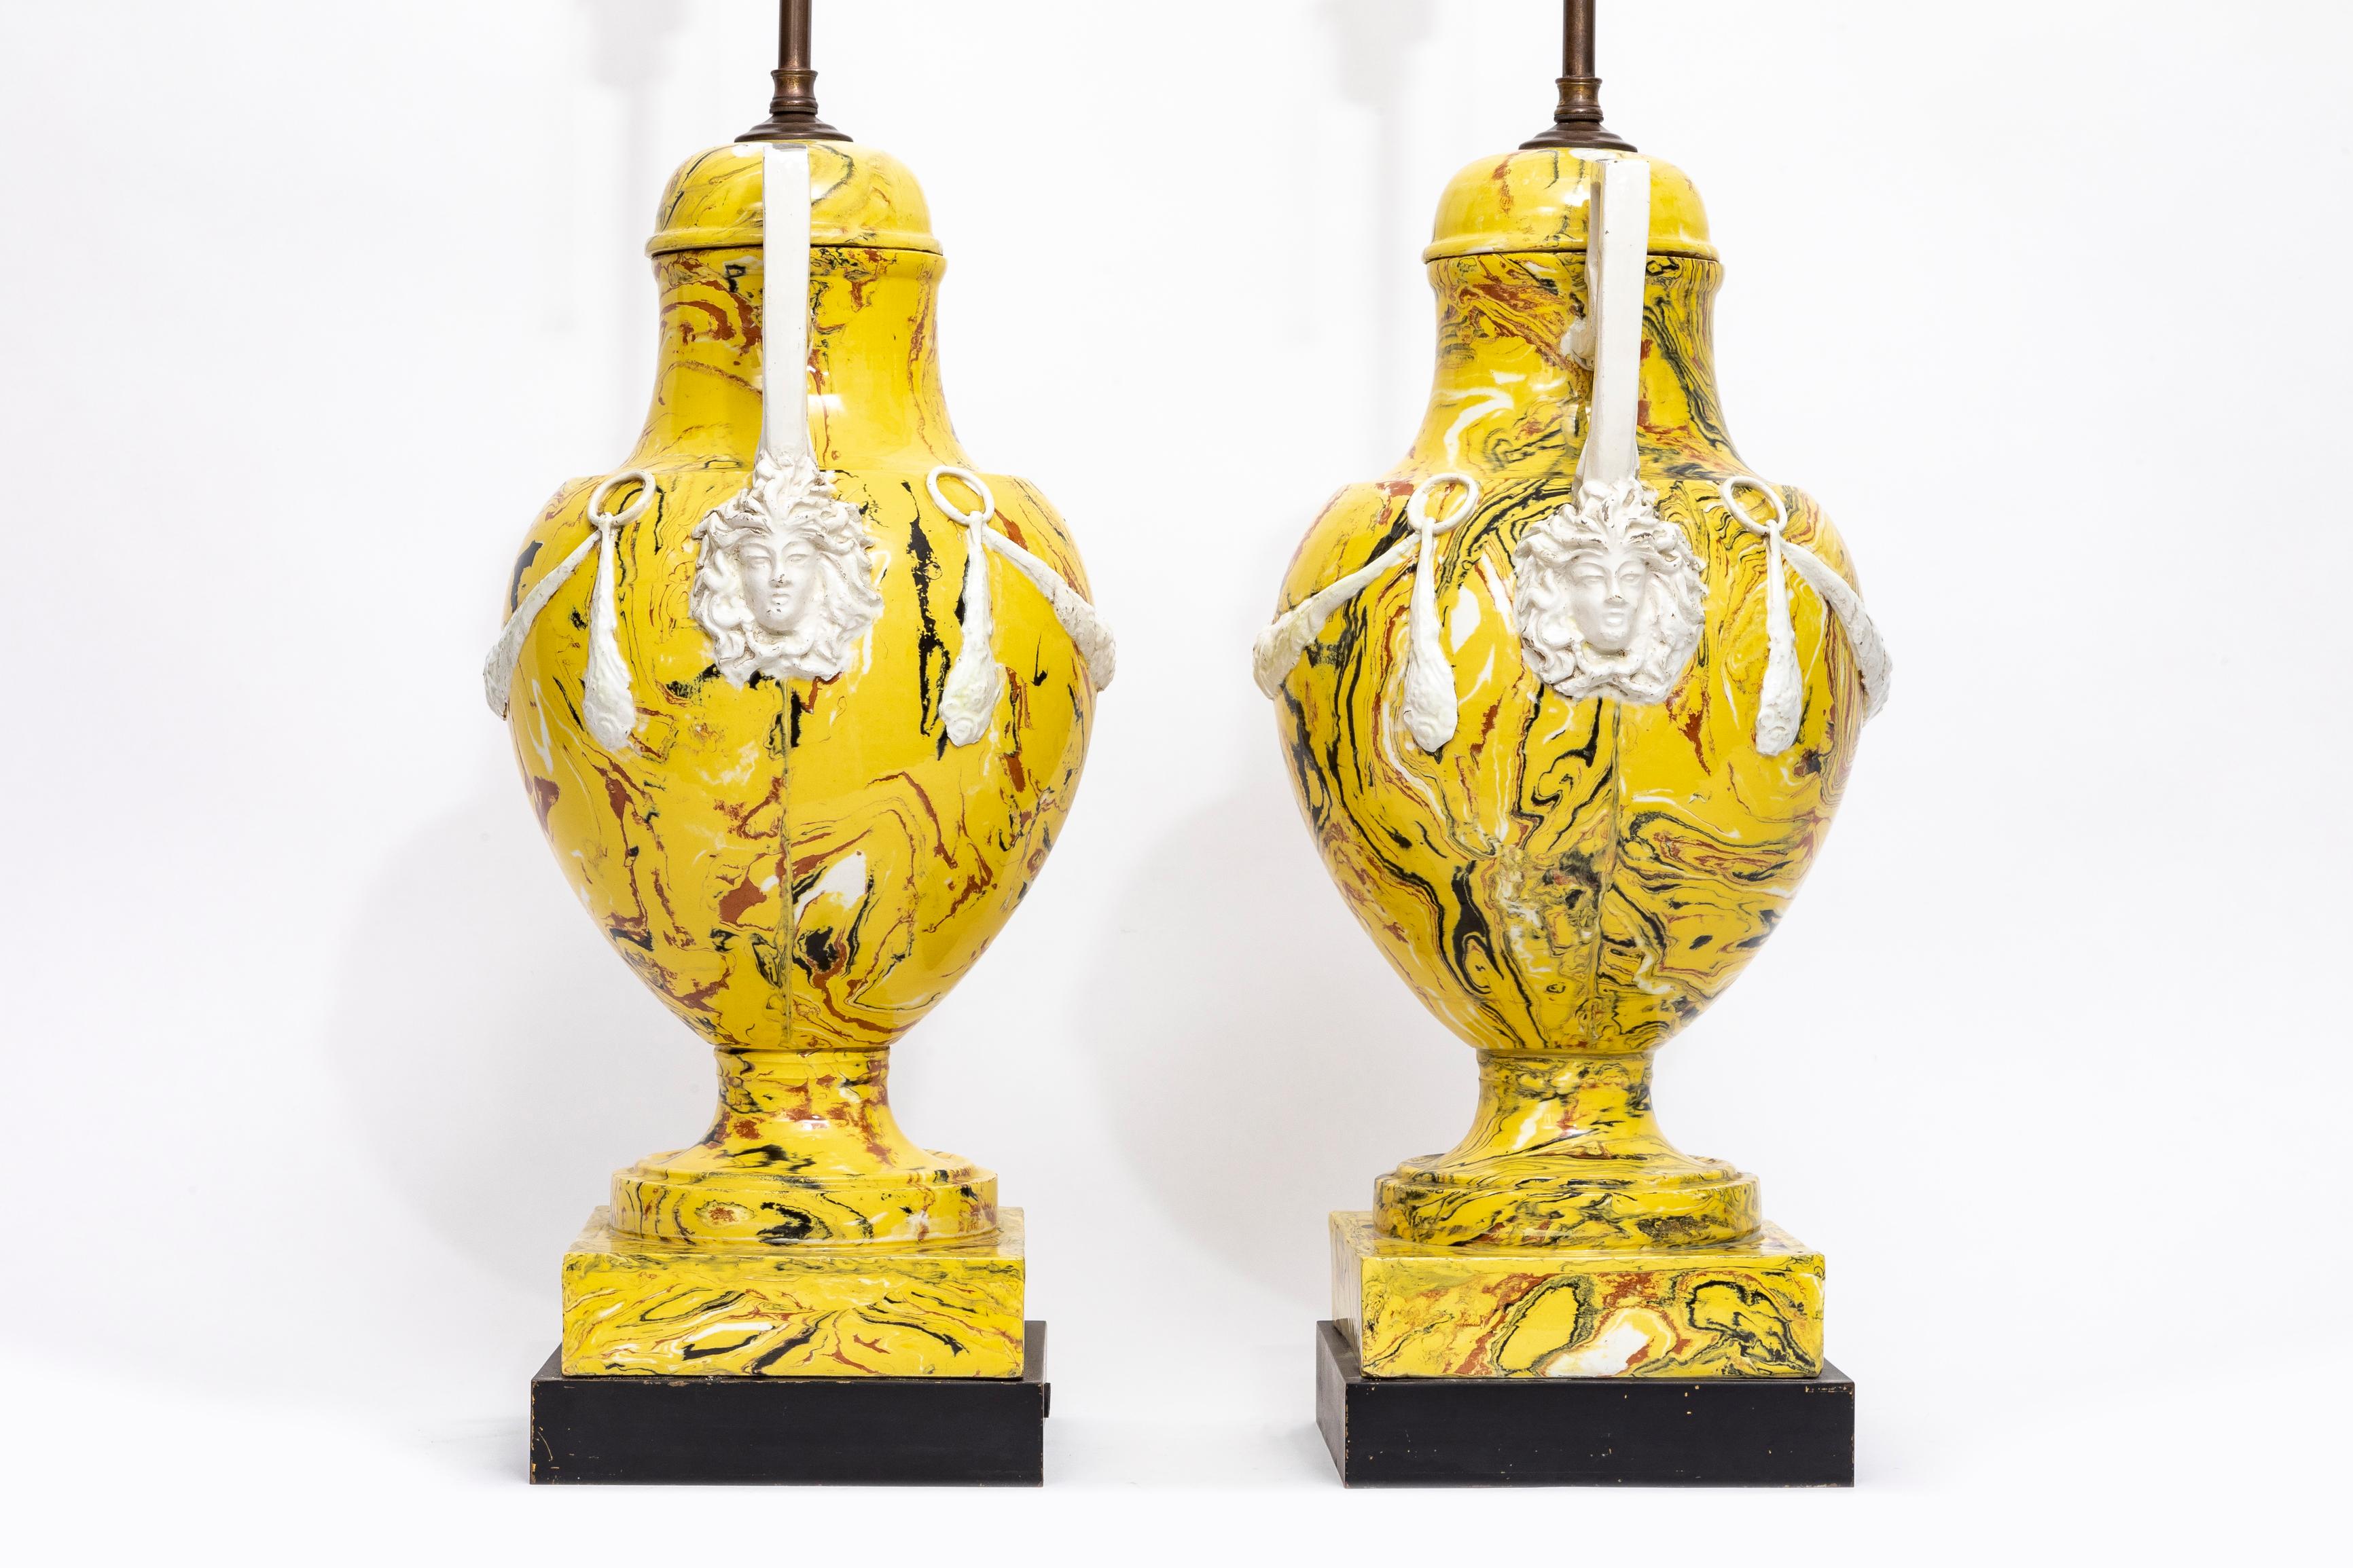 Hand-Painted Pair of Italian Agateware Porcelain Lamps with Medusa Masks, Wreaths, & Handles For Sale